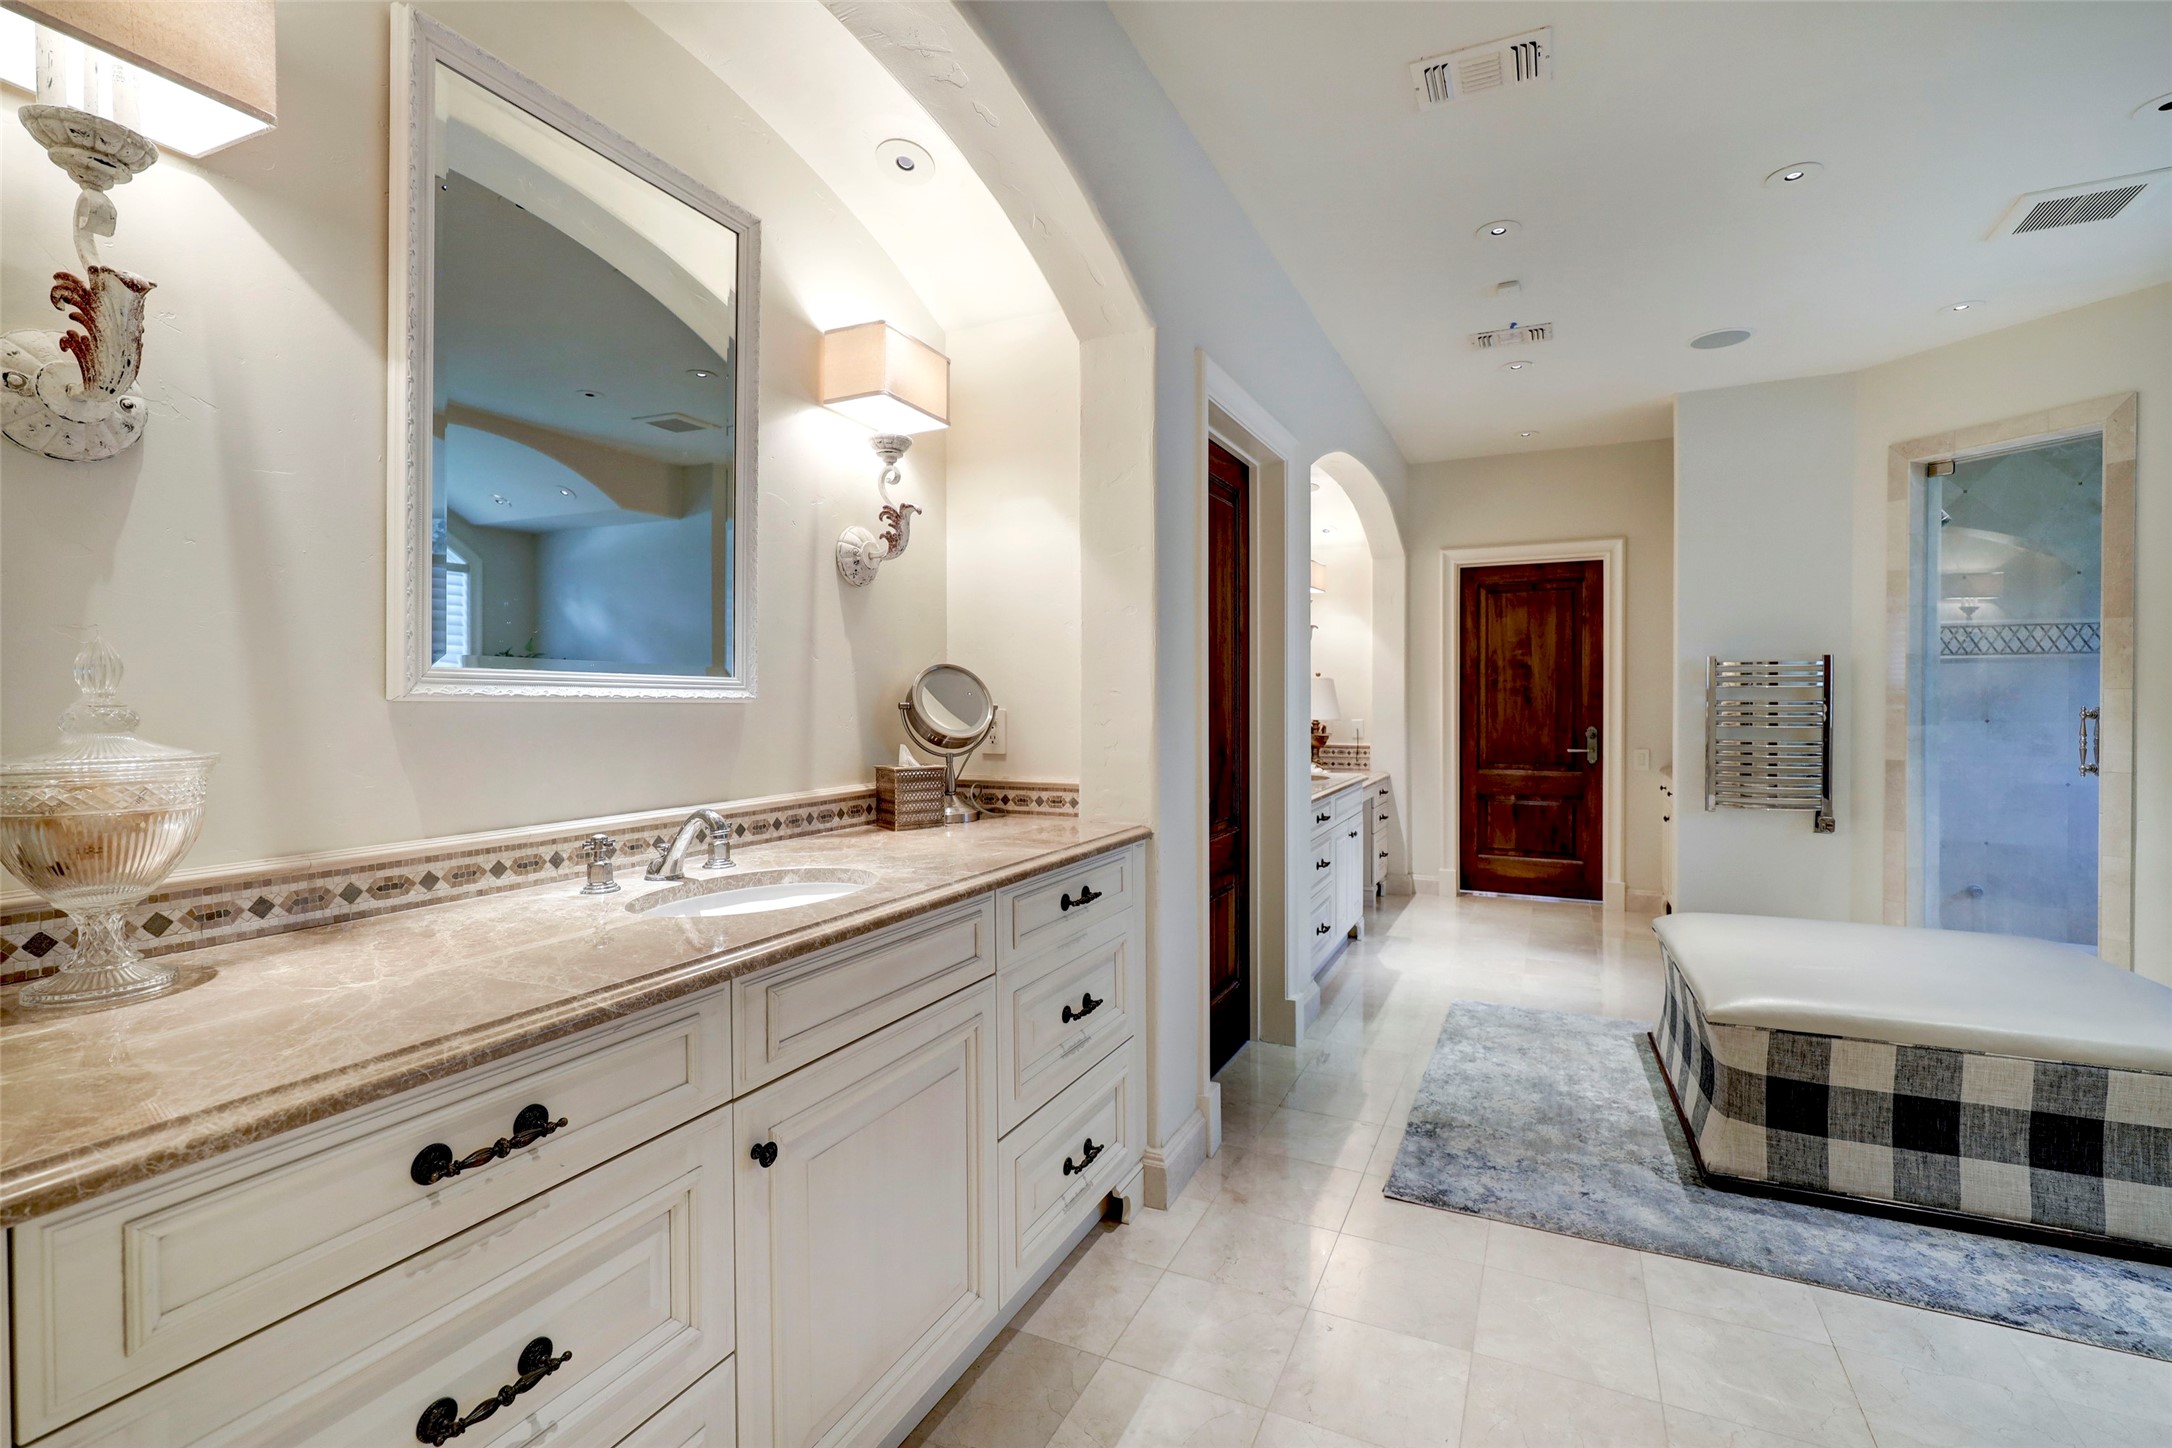 The marble primary bath includes two sinks, vanity area, shower, jetted tub and towel warmer.